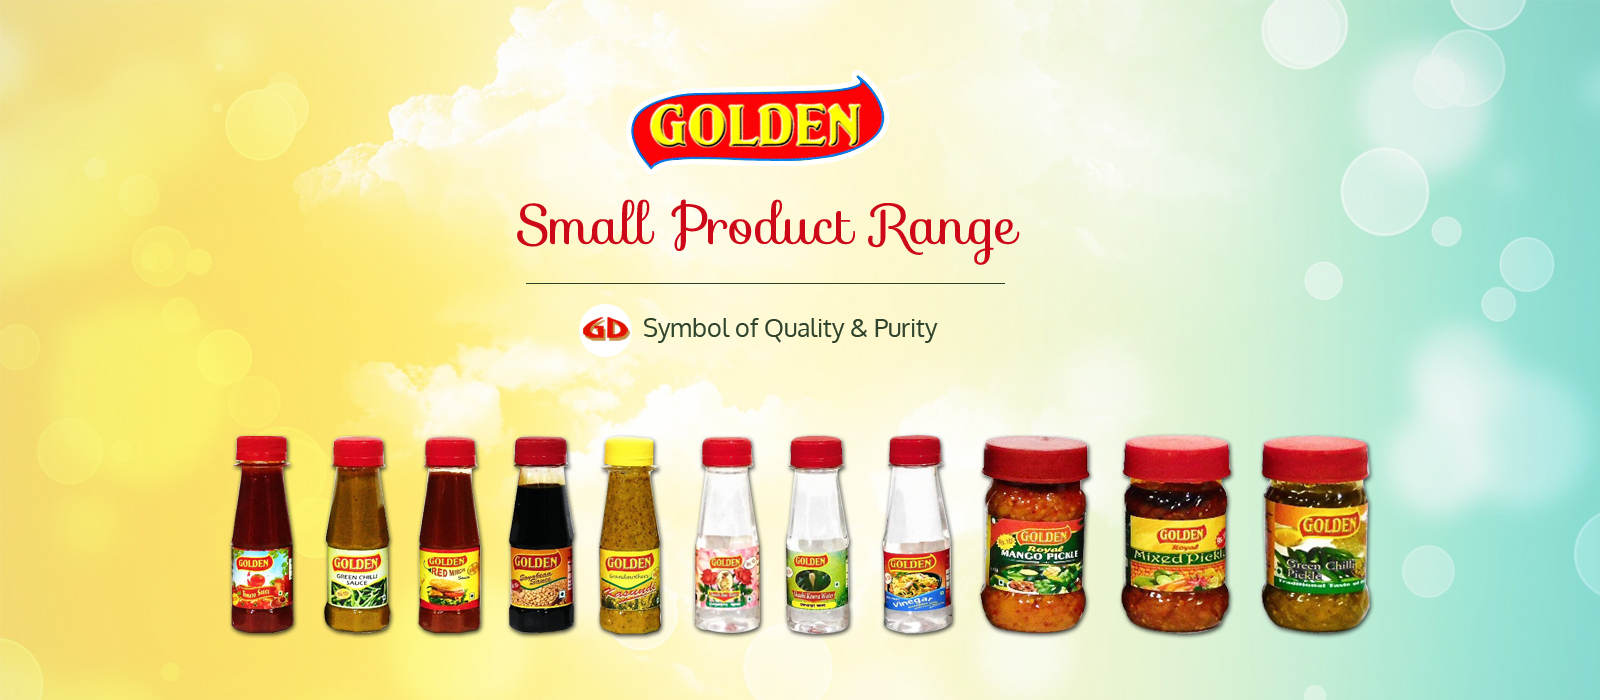 Golden Small Product